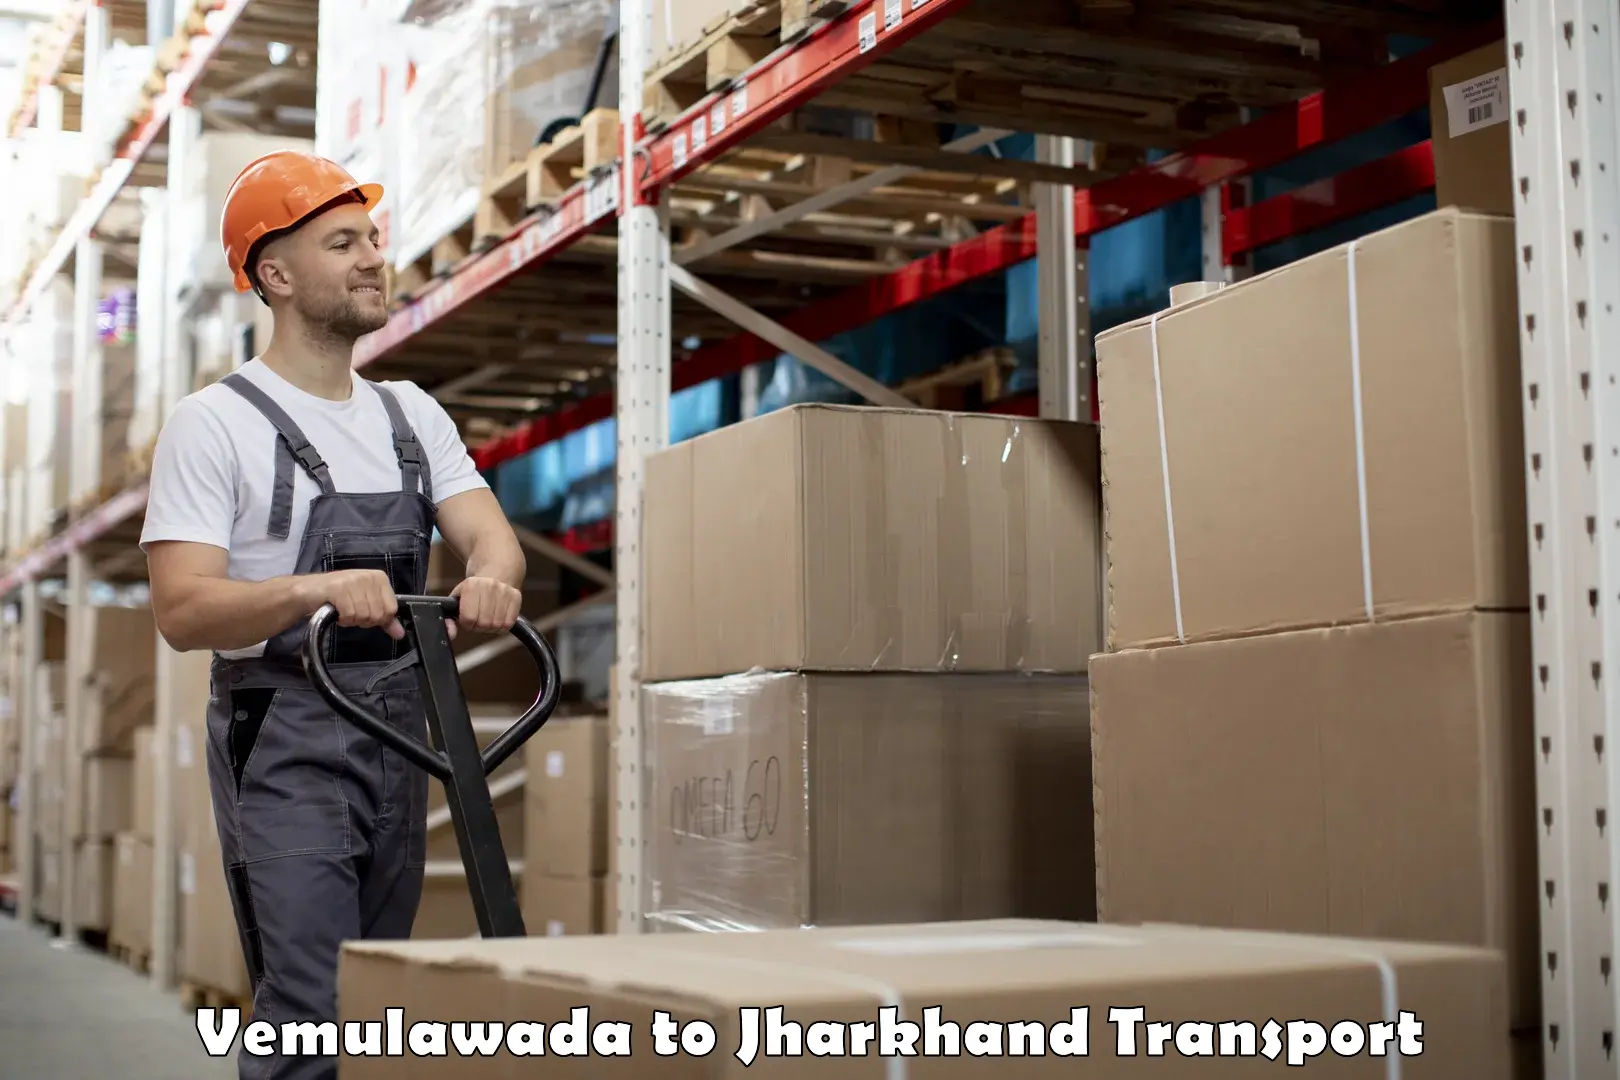 Two wheeler parcel service Vemulawada to Dhanbad